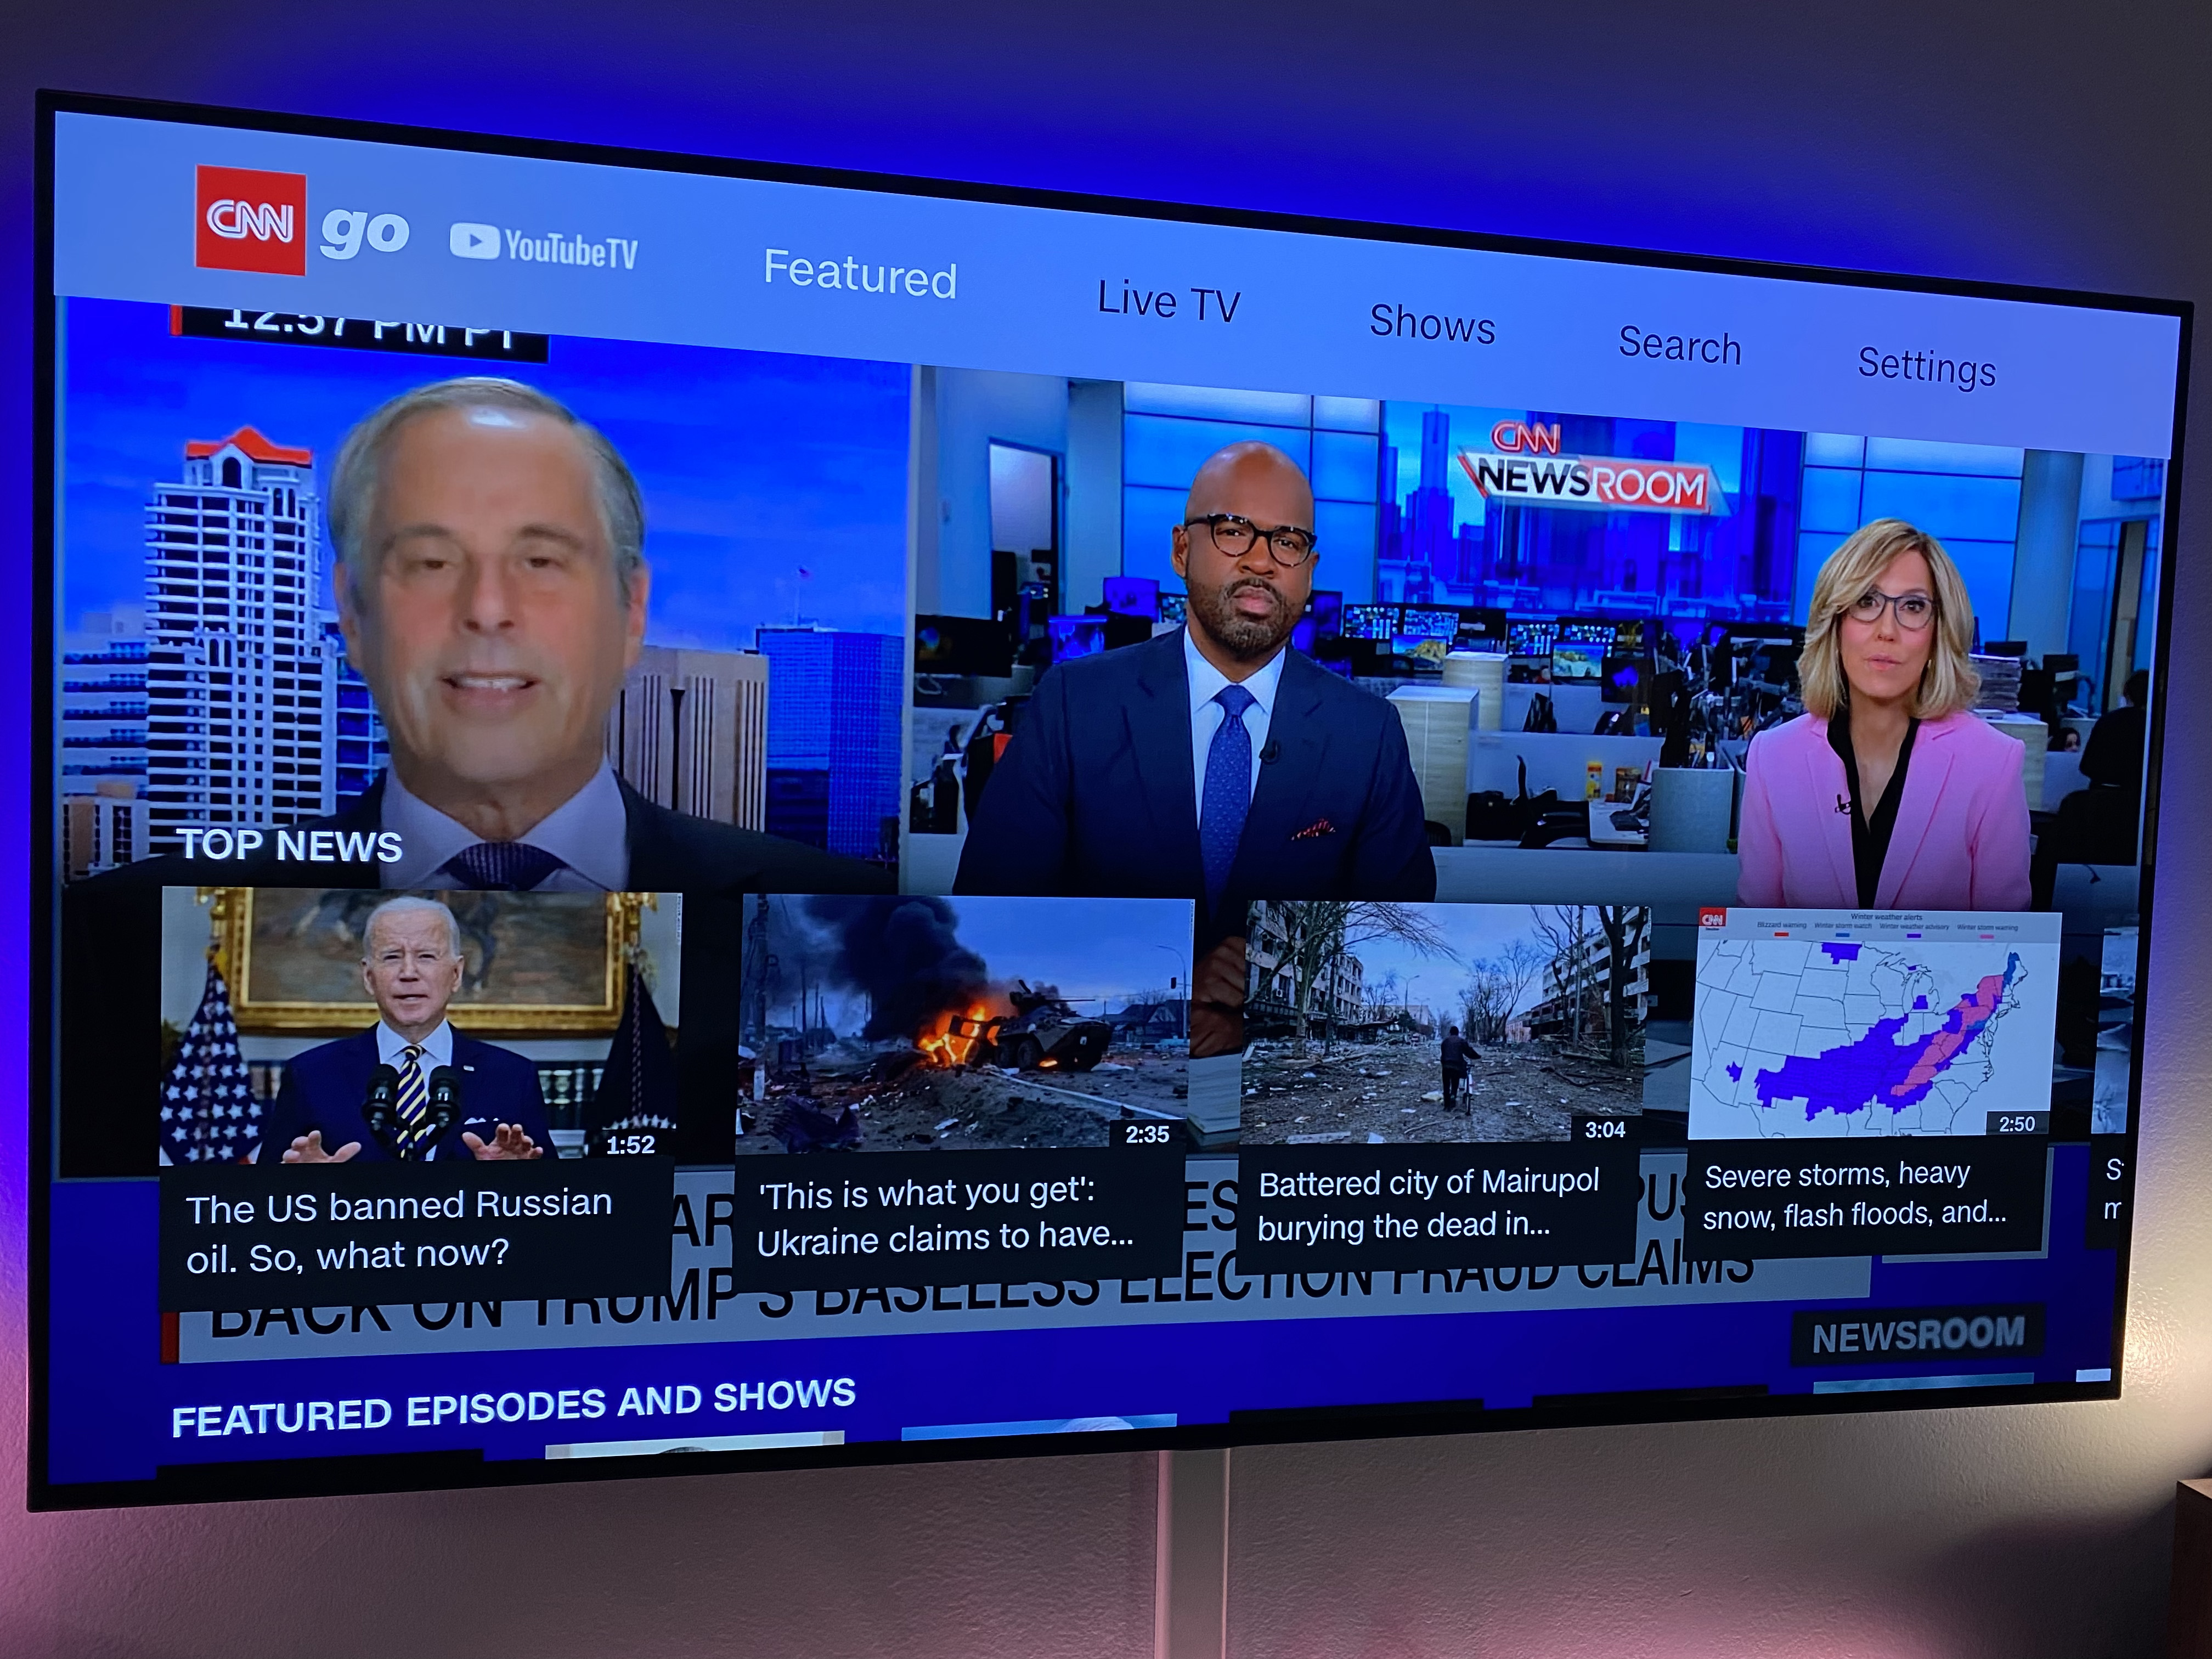 How to watch and stream CNN Newsroom with Rosemary Church - 2020 on Roku